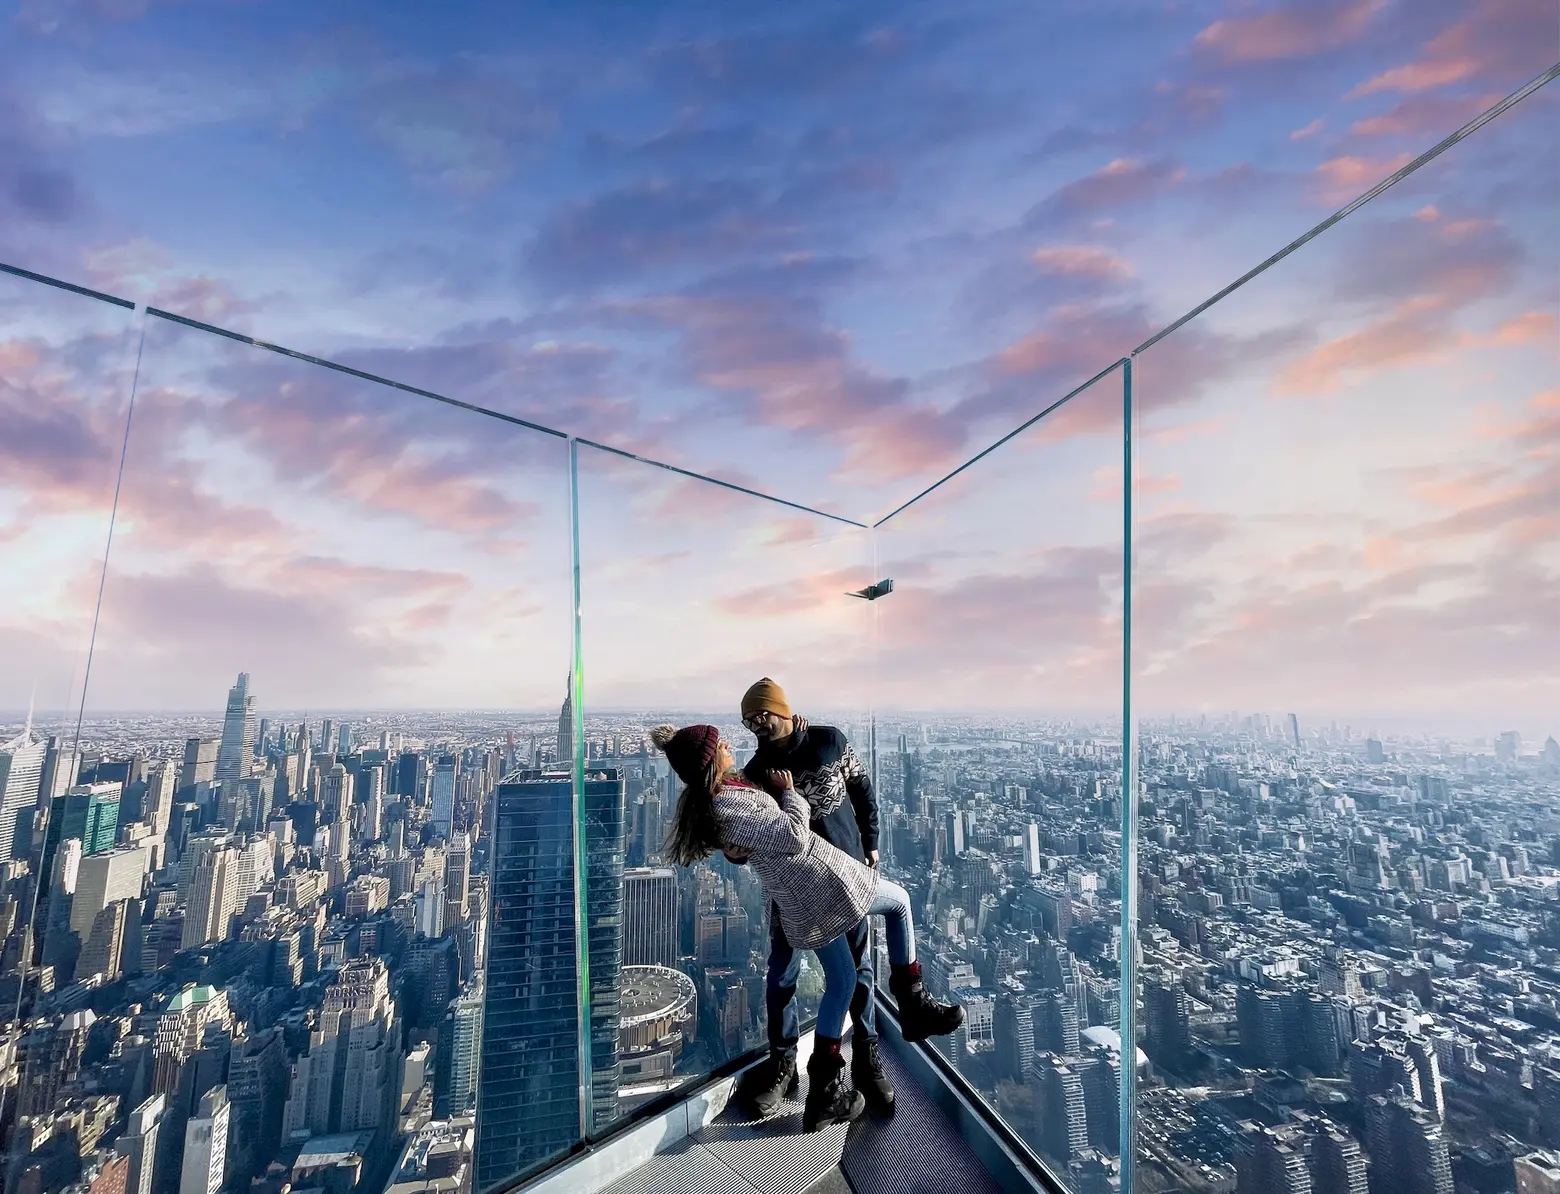 This Valentine’s Day, watch the sunrise from 1,131 feet above NYC at Edge